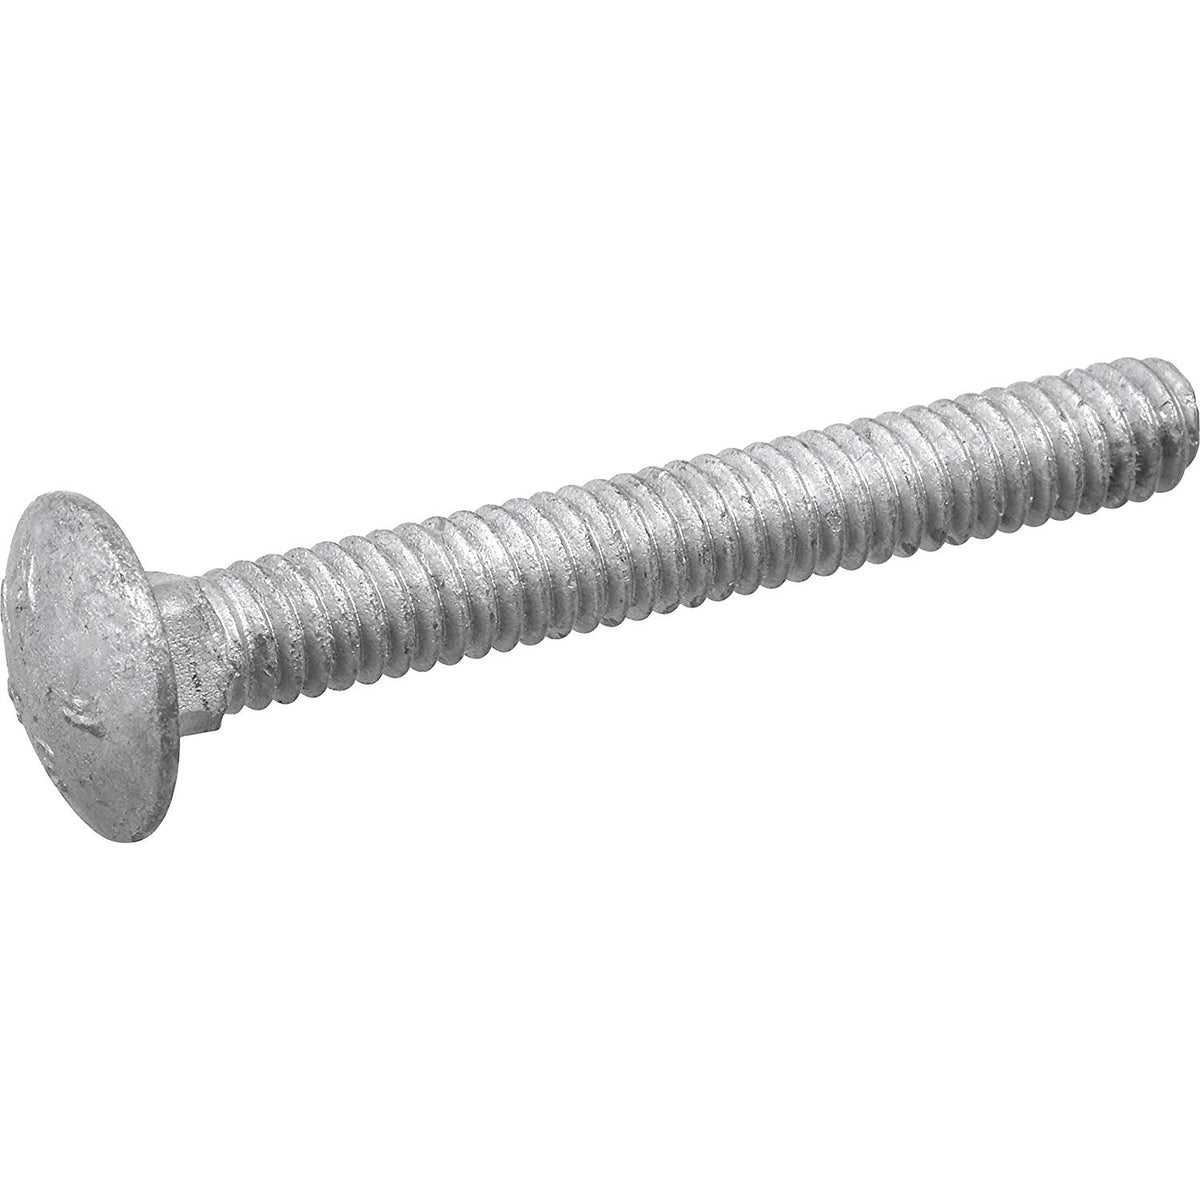 Hillman 812563 Flat Head Carriage Bolts, Galvanized, 5/16" x 6", 50-Count